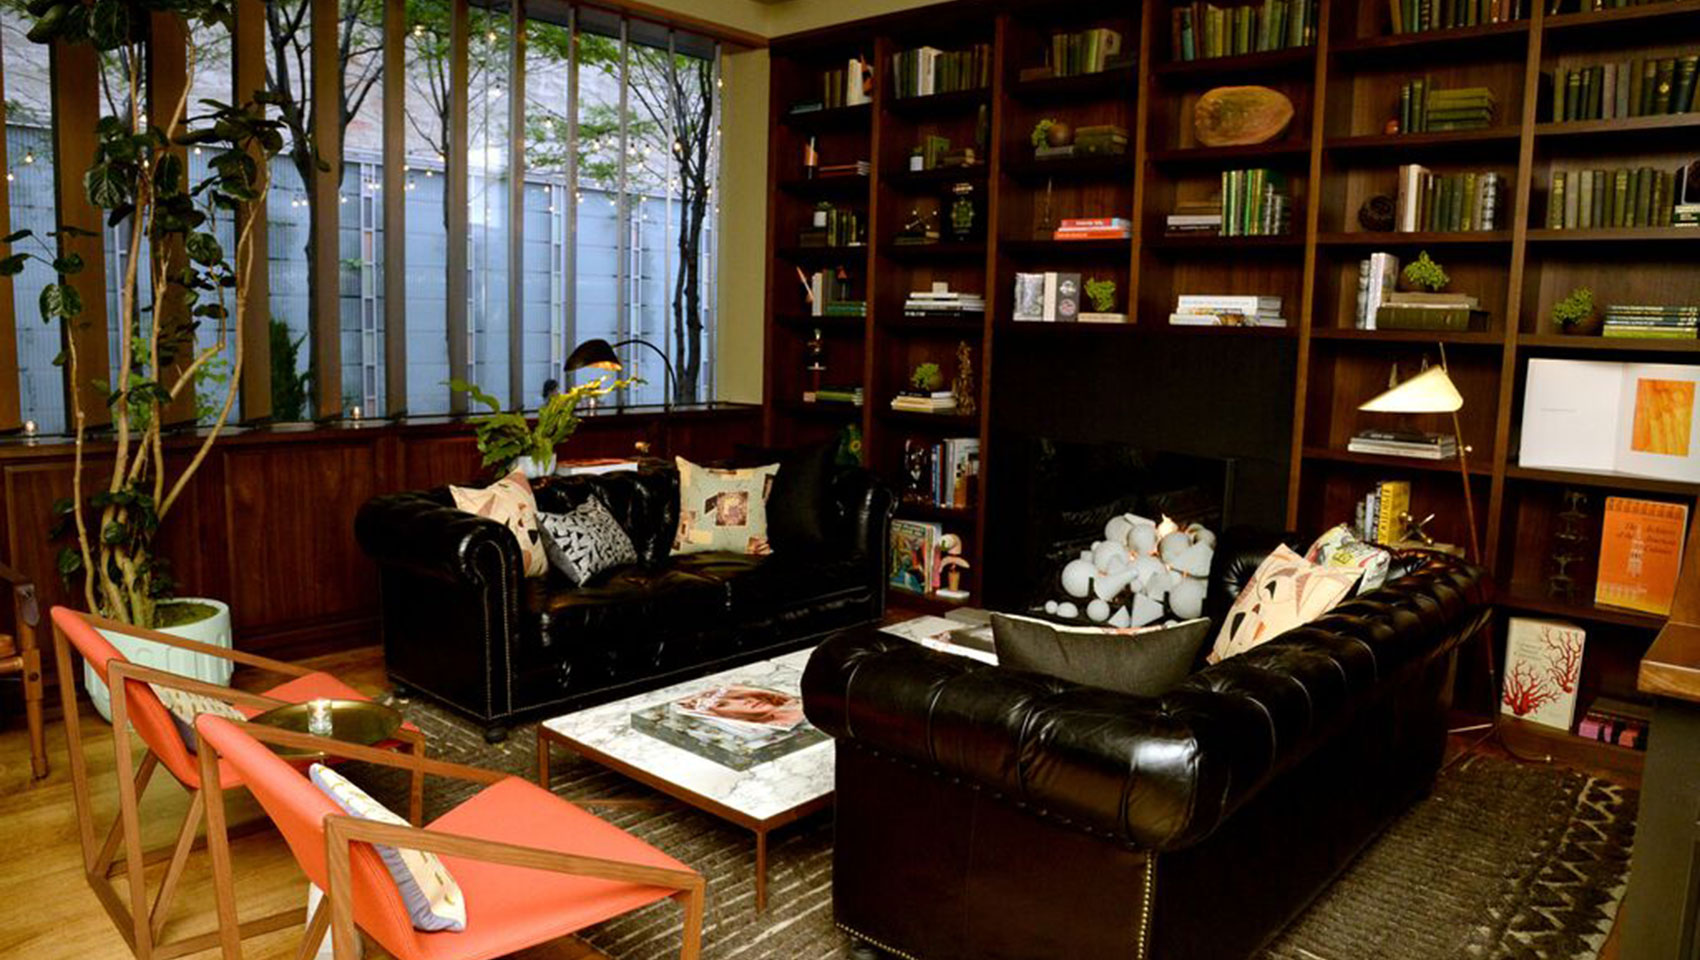 Back Bar lounge seating with leather couches, marble coffee table, and shelves with books and accent pieces